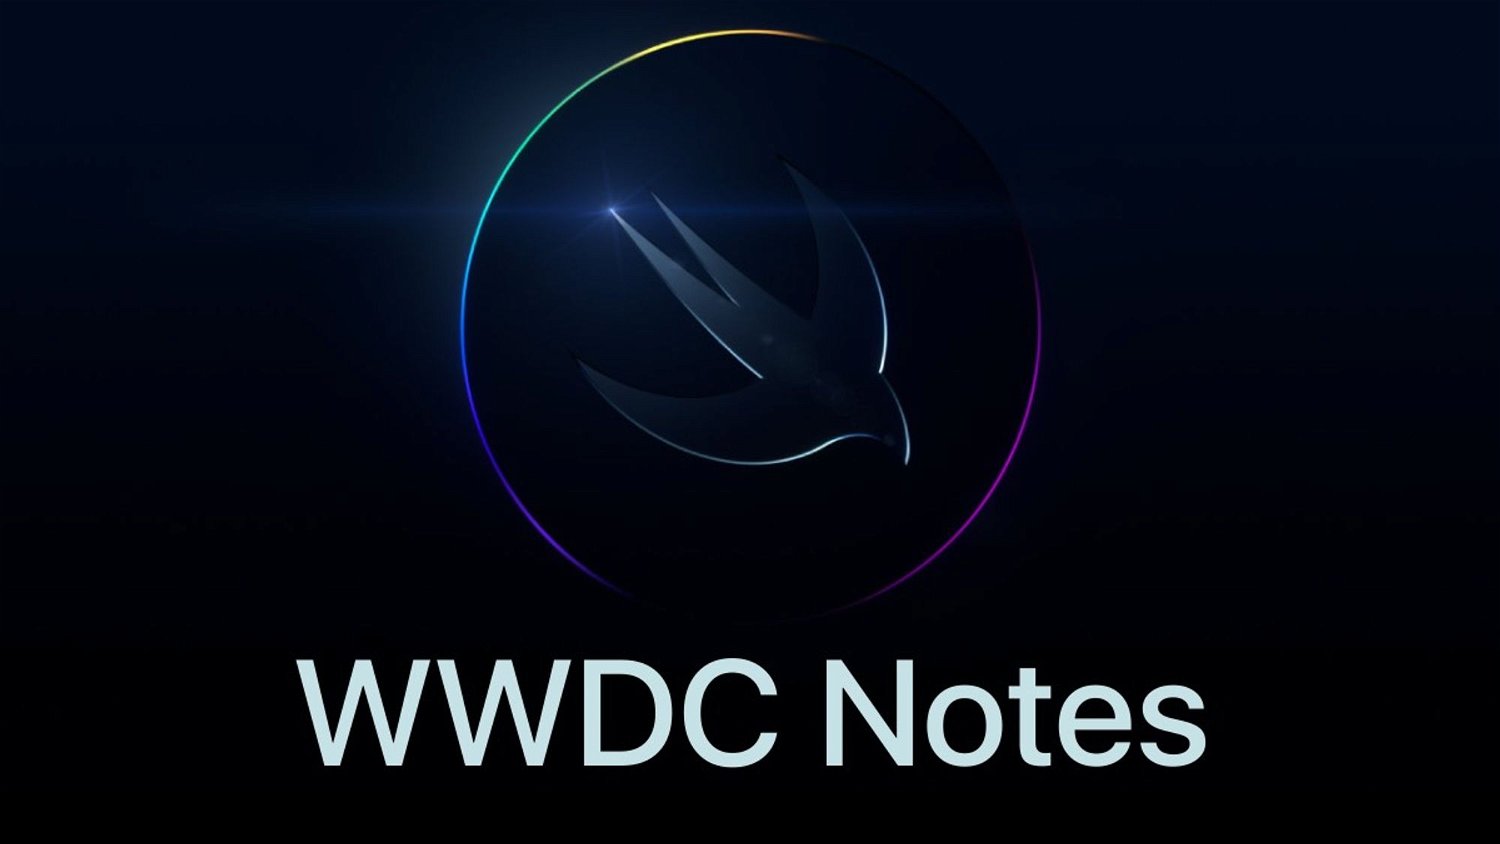 WWDC NOTES